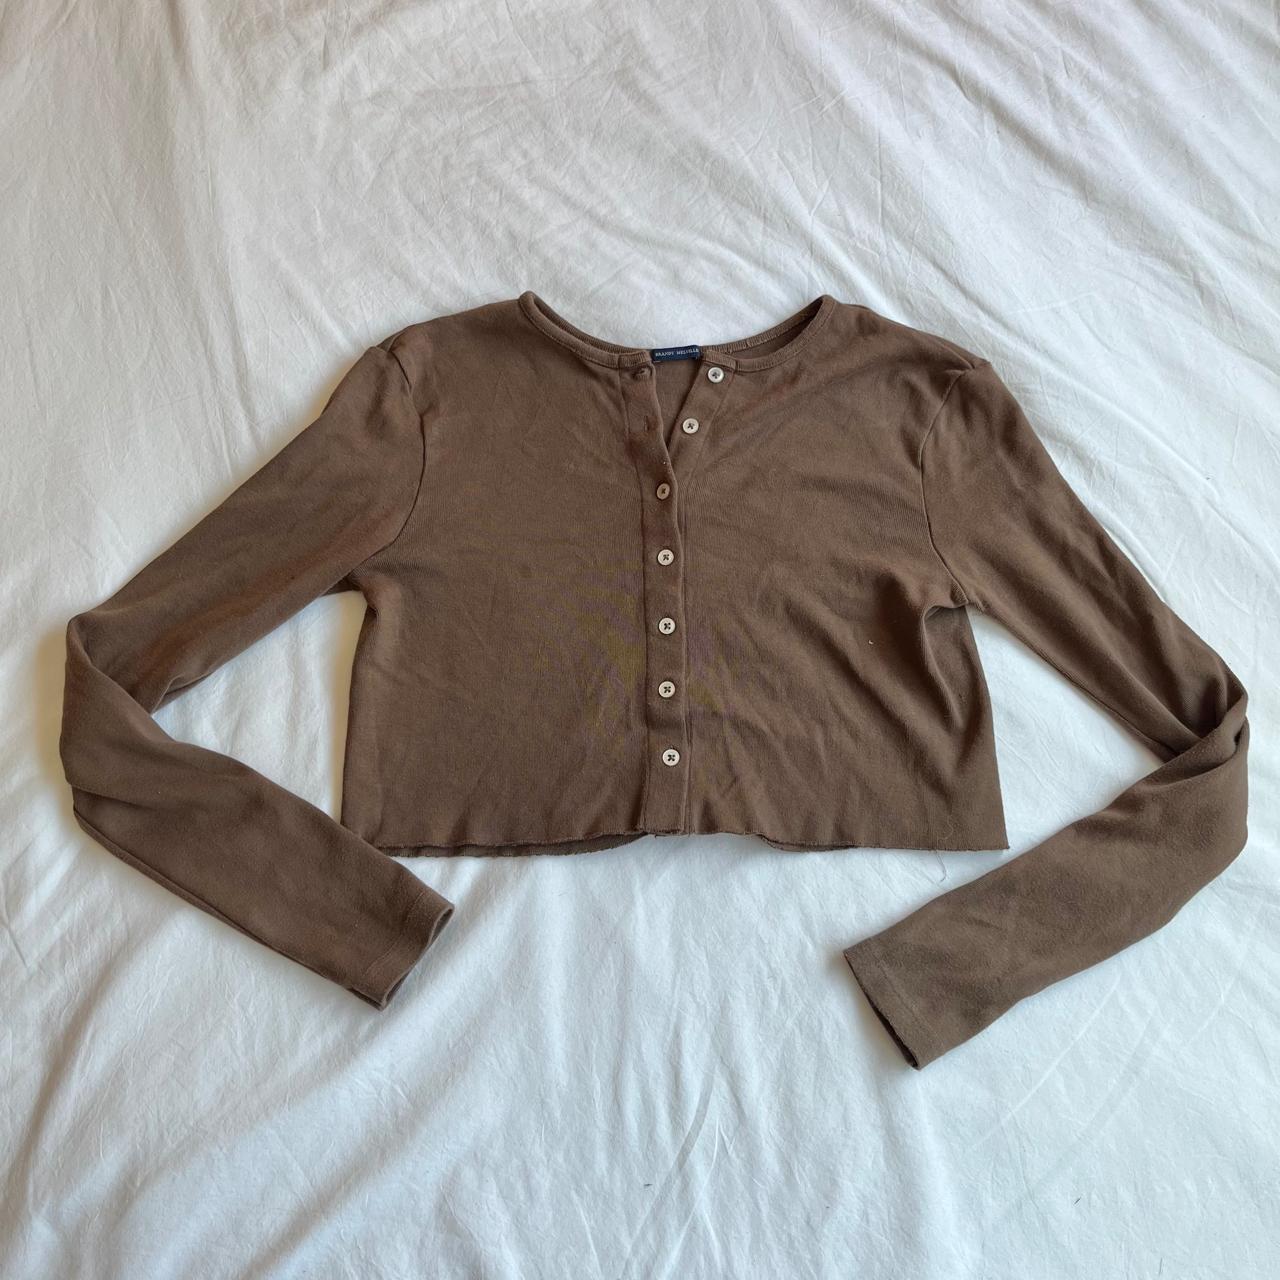 ୨୧ brandy melville button up top ୨୧ free shipping ... - Depop